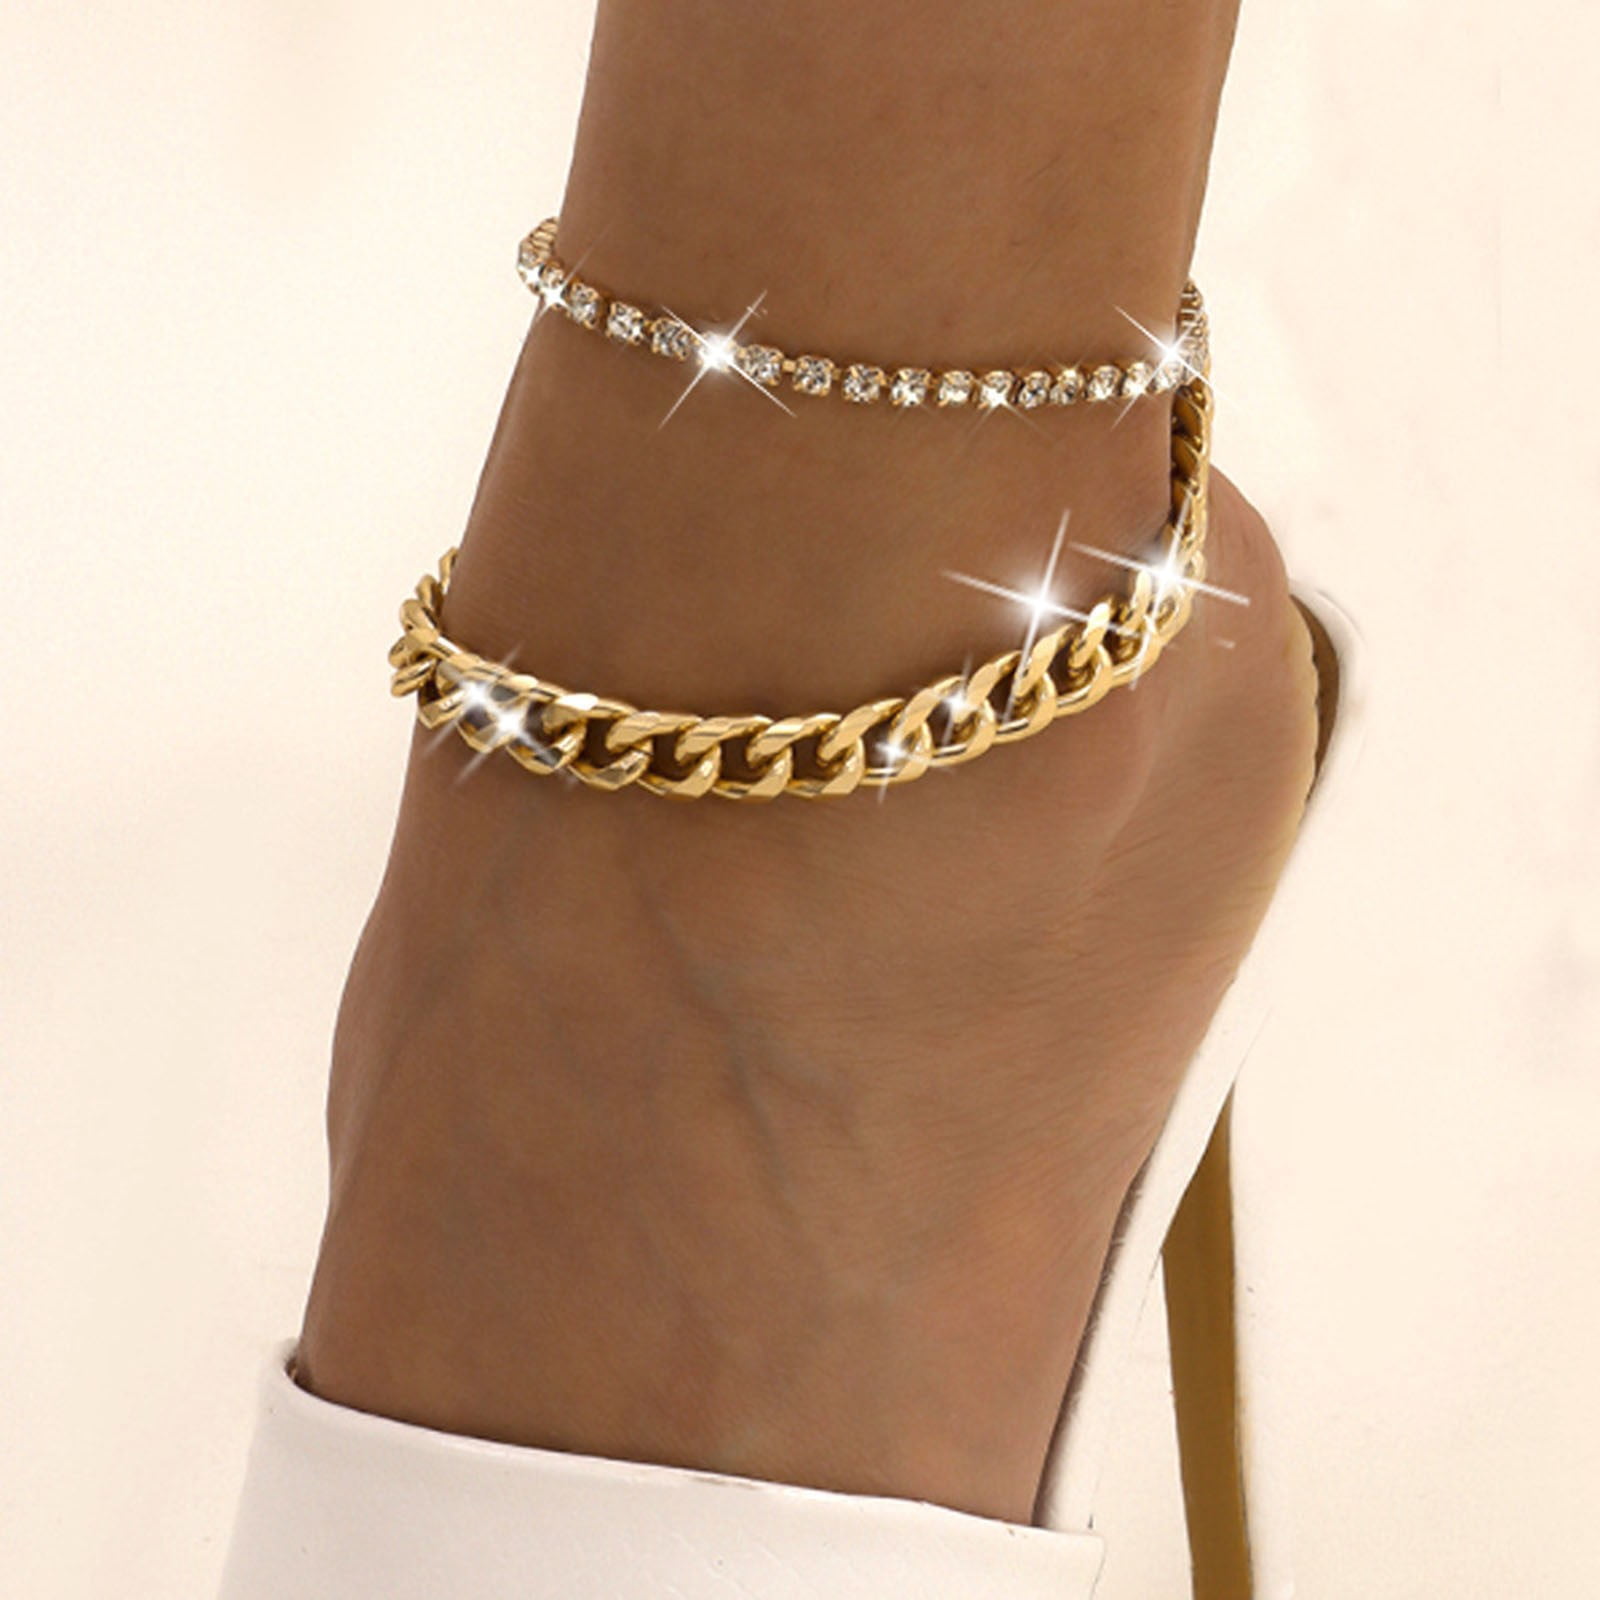 Infinity Ankle Bracelet in Gold Plating with Birthstone - MYKA